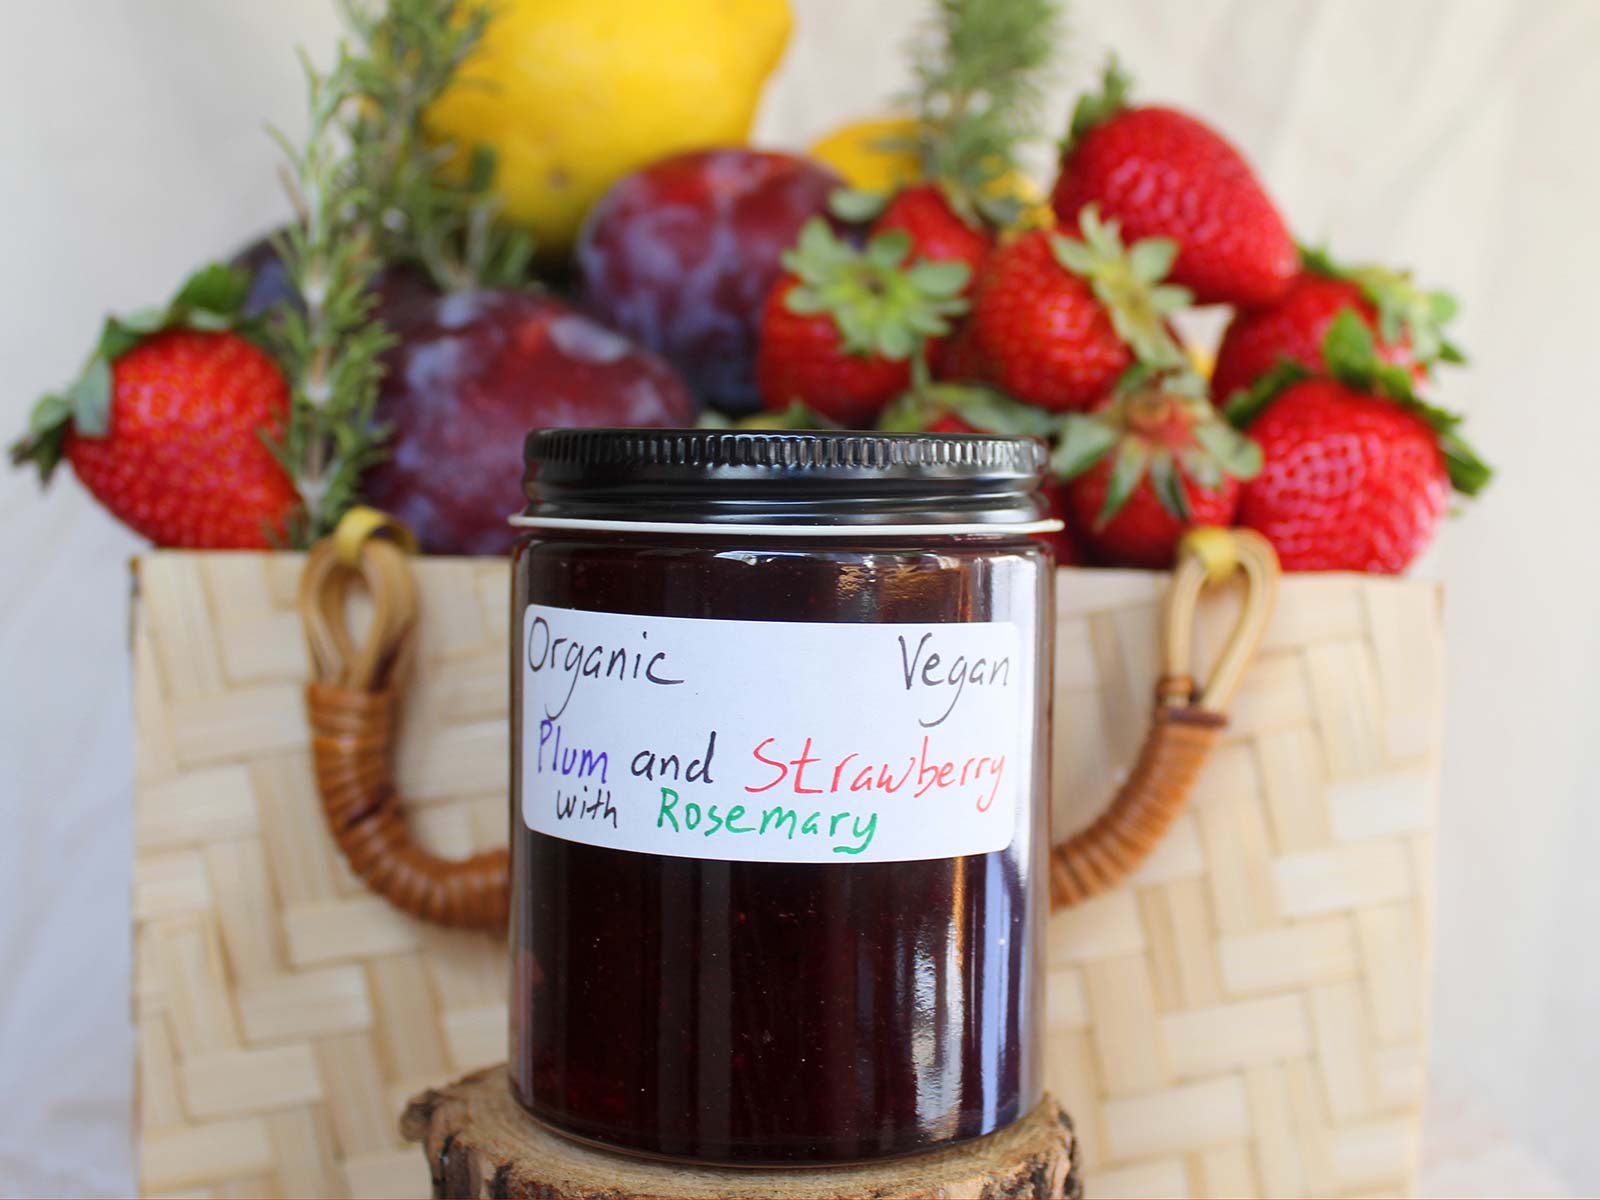 Plum and Strawberry Jam with Rosemary